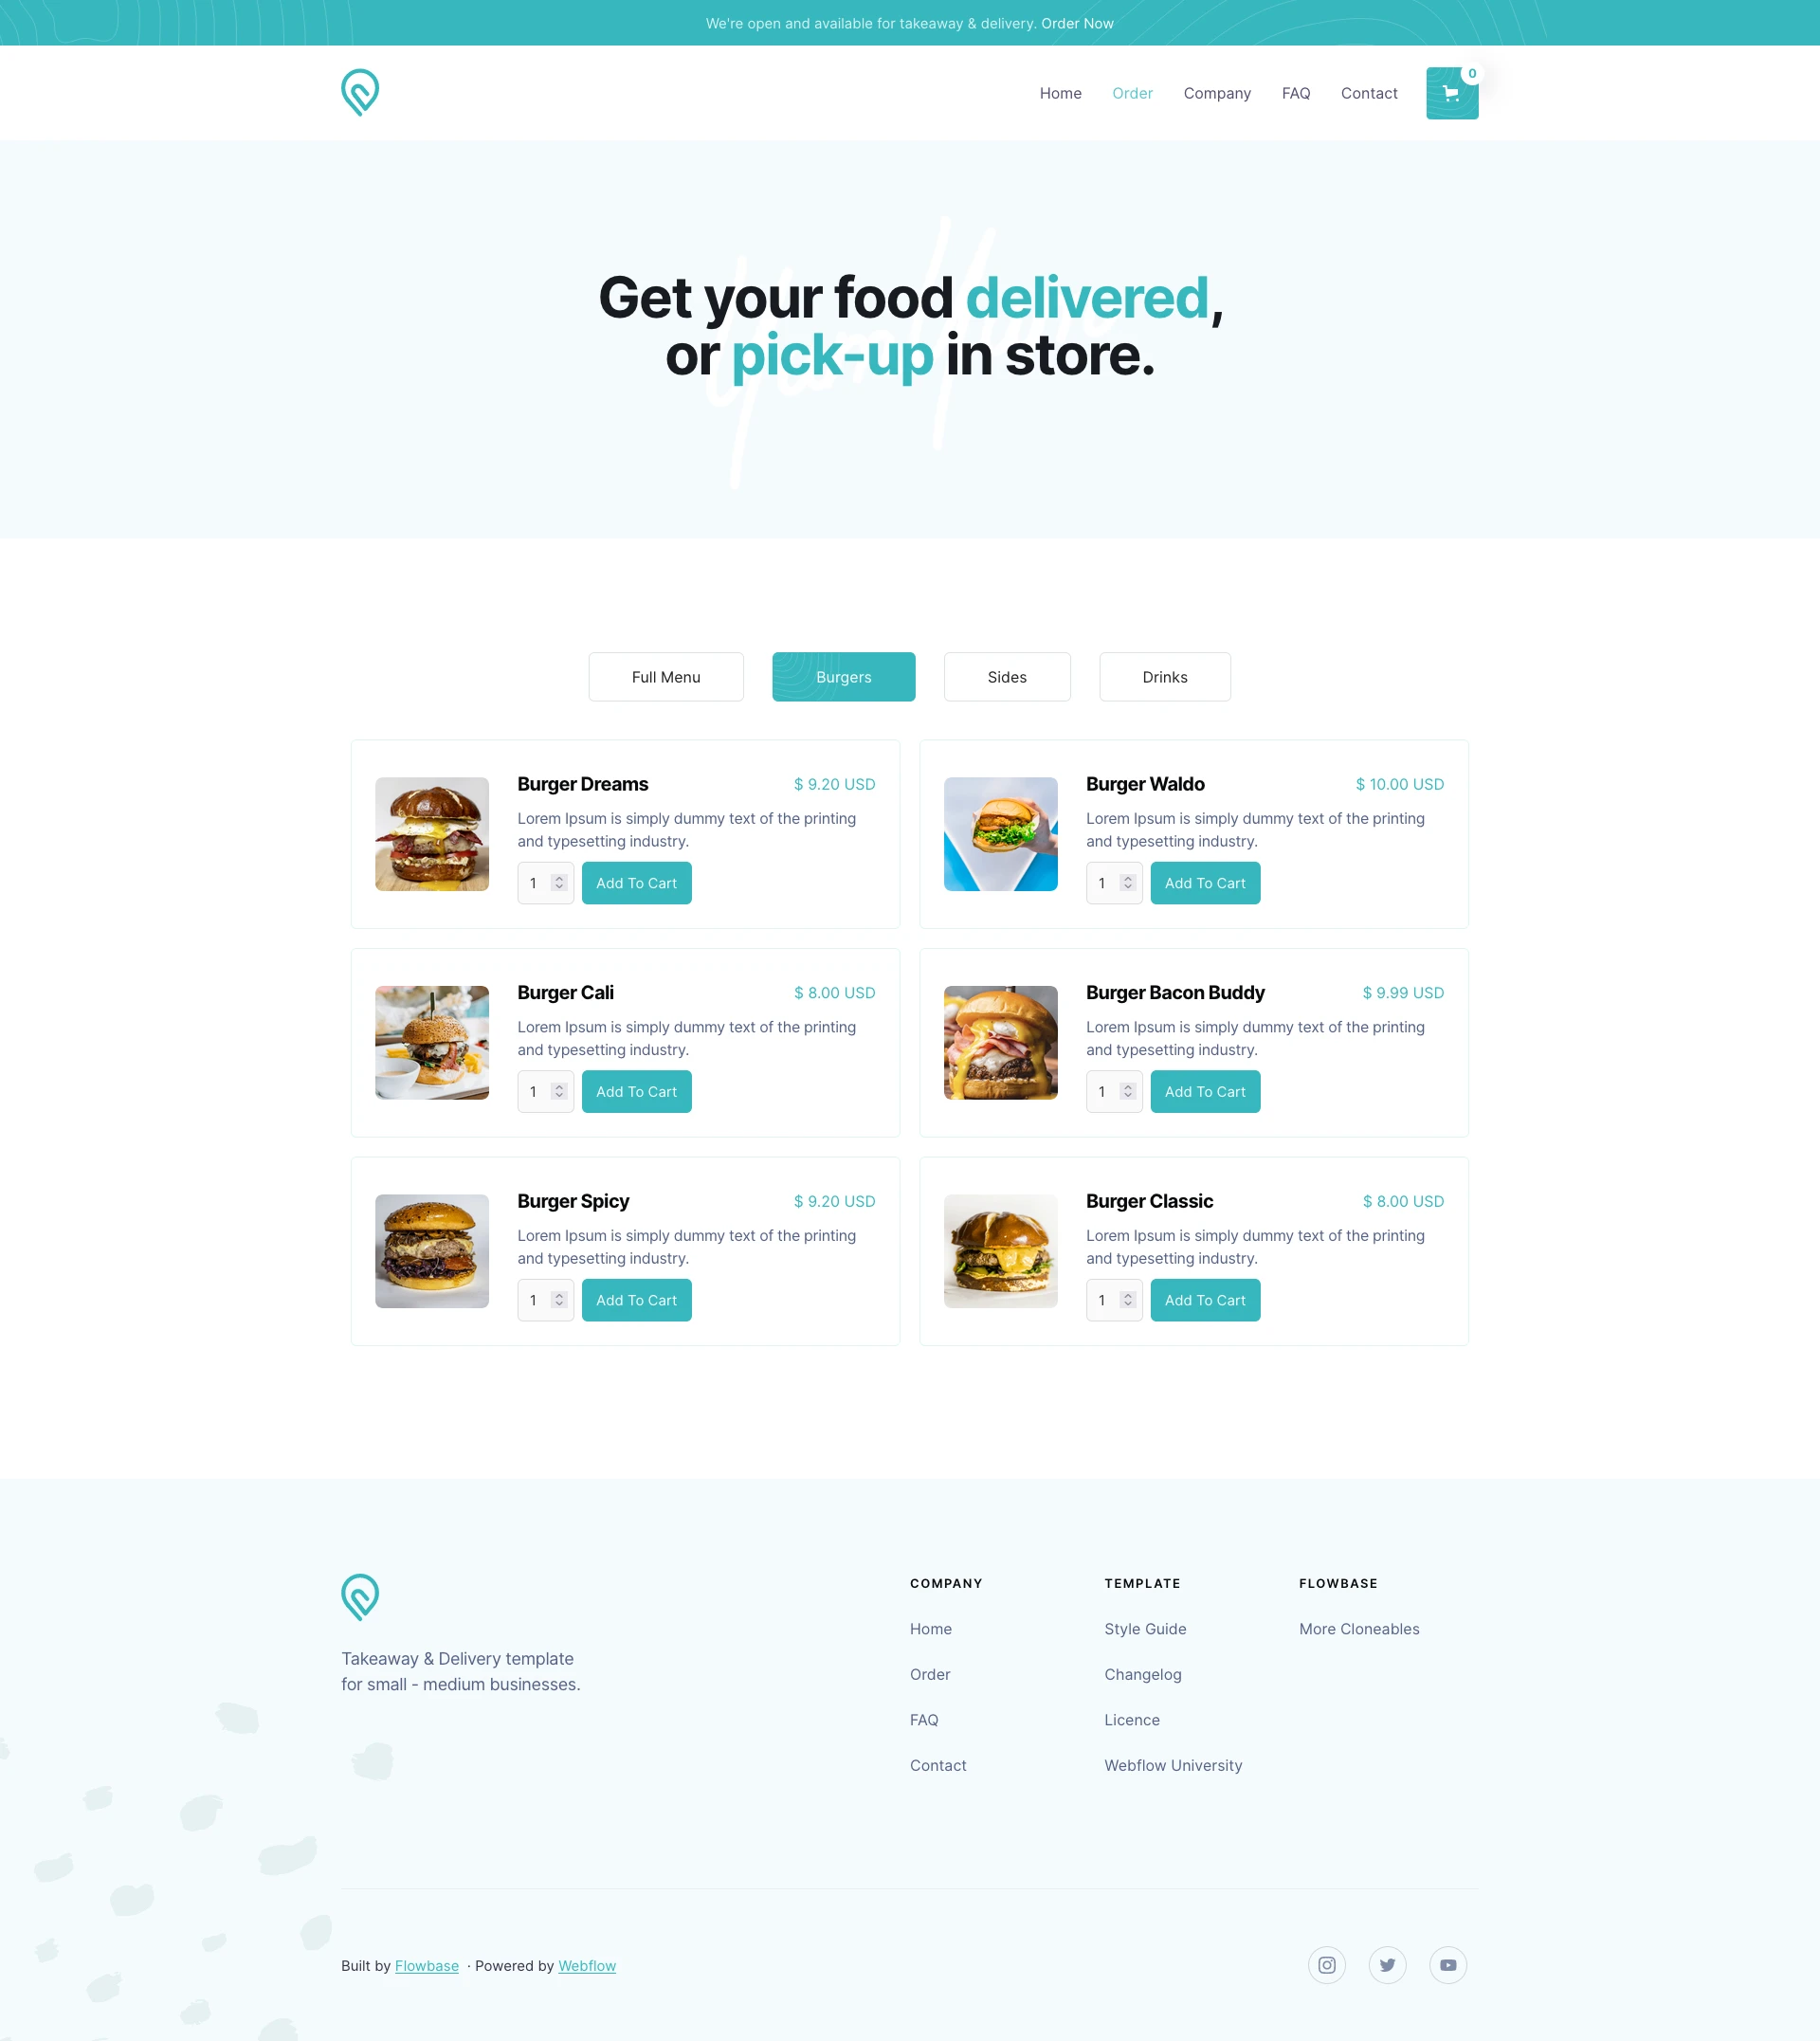 Chomp Restaurant - Free Webflow Template - Chomp Webflow Ecommerce Template is the complete package for businesses wanting to provide & sell their products online. Tailored towards restaurants and the food industry, your business can rapidly adjust the template and provide a beautiful e-commerce experience.